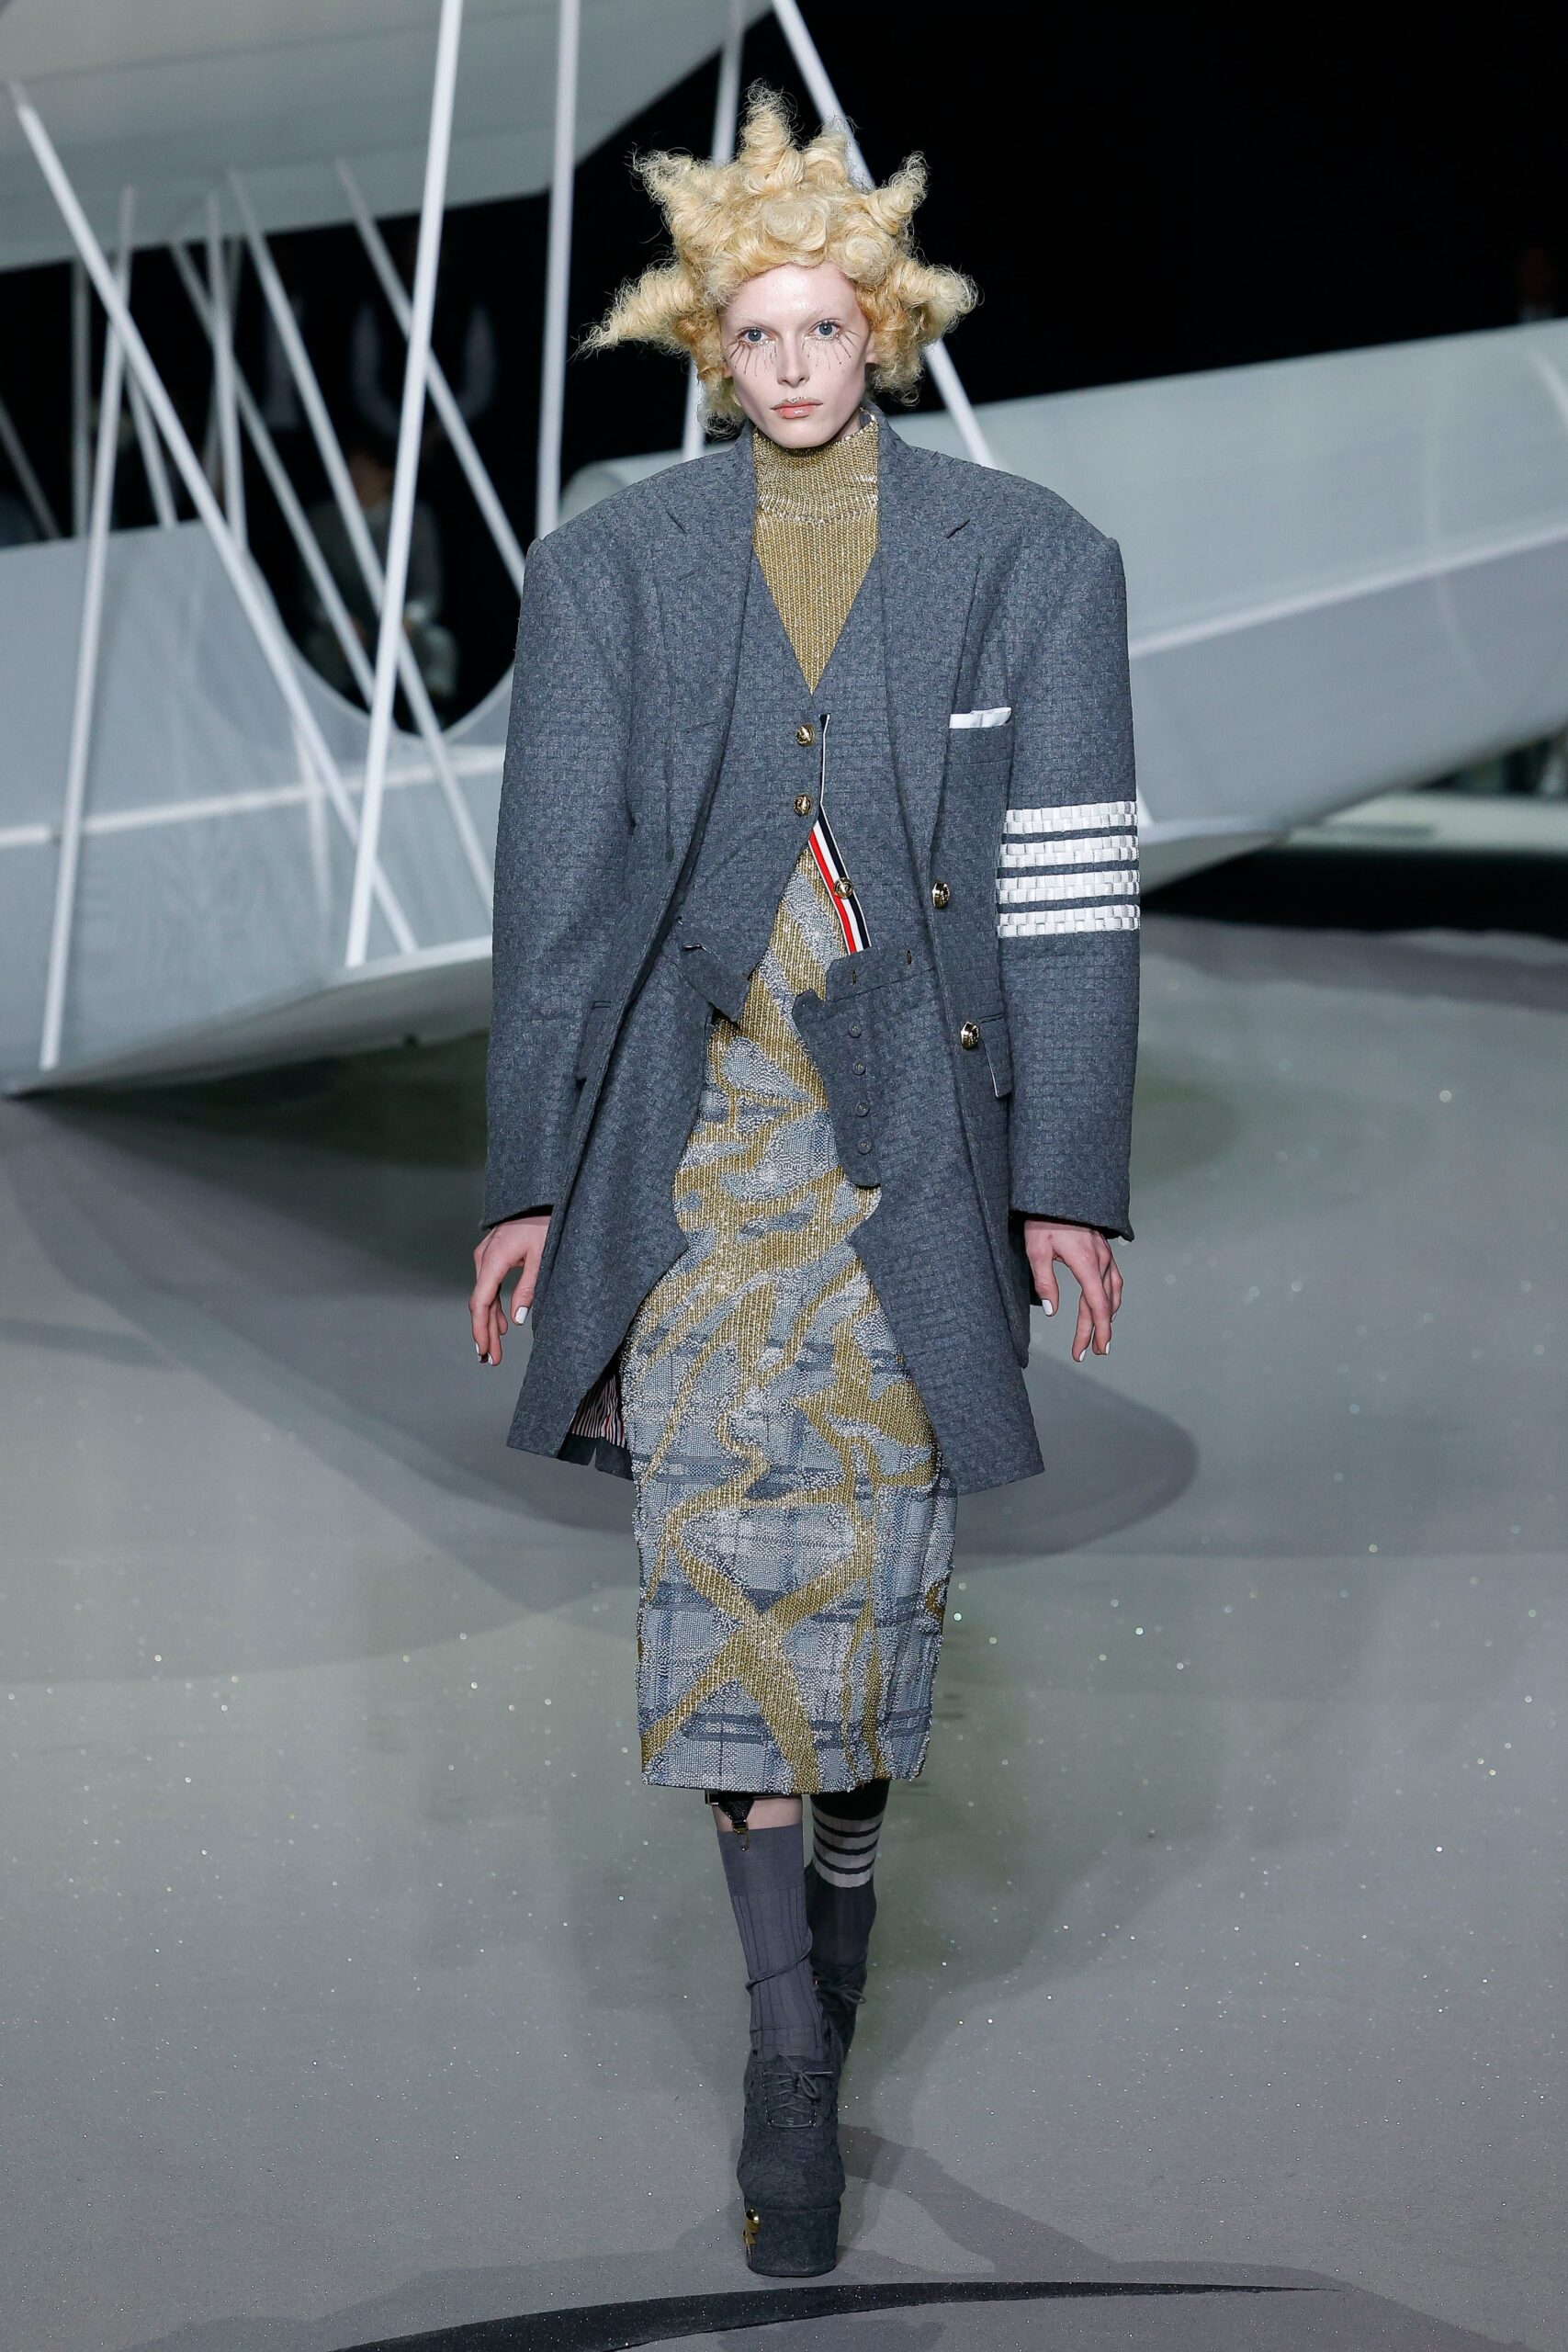 New York Fashion Week Schedule Includes Thom Browne and Ludovic de Saint Sernin